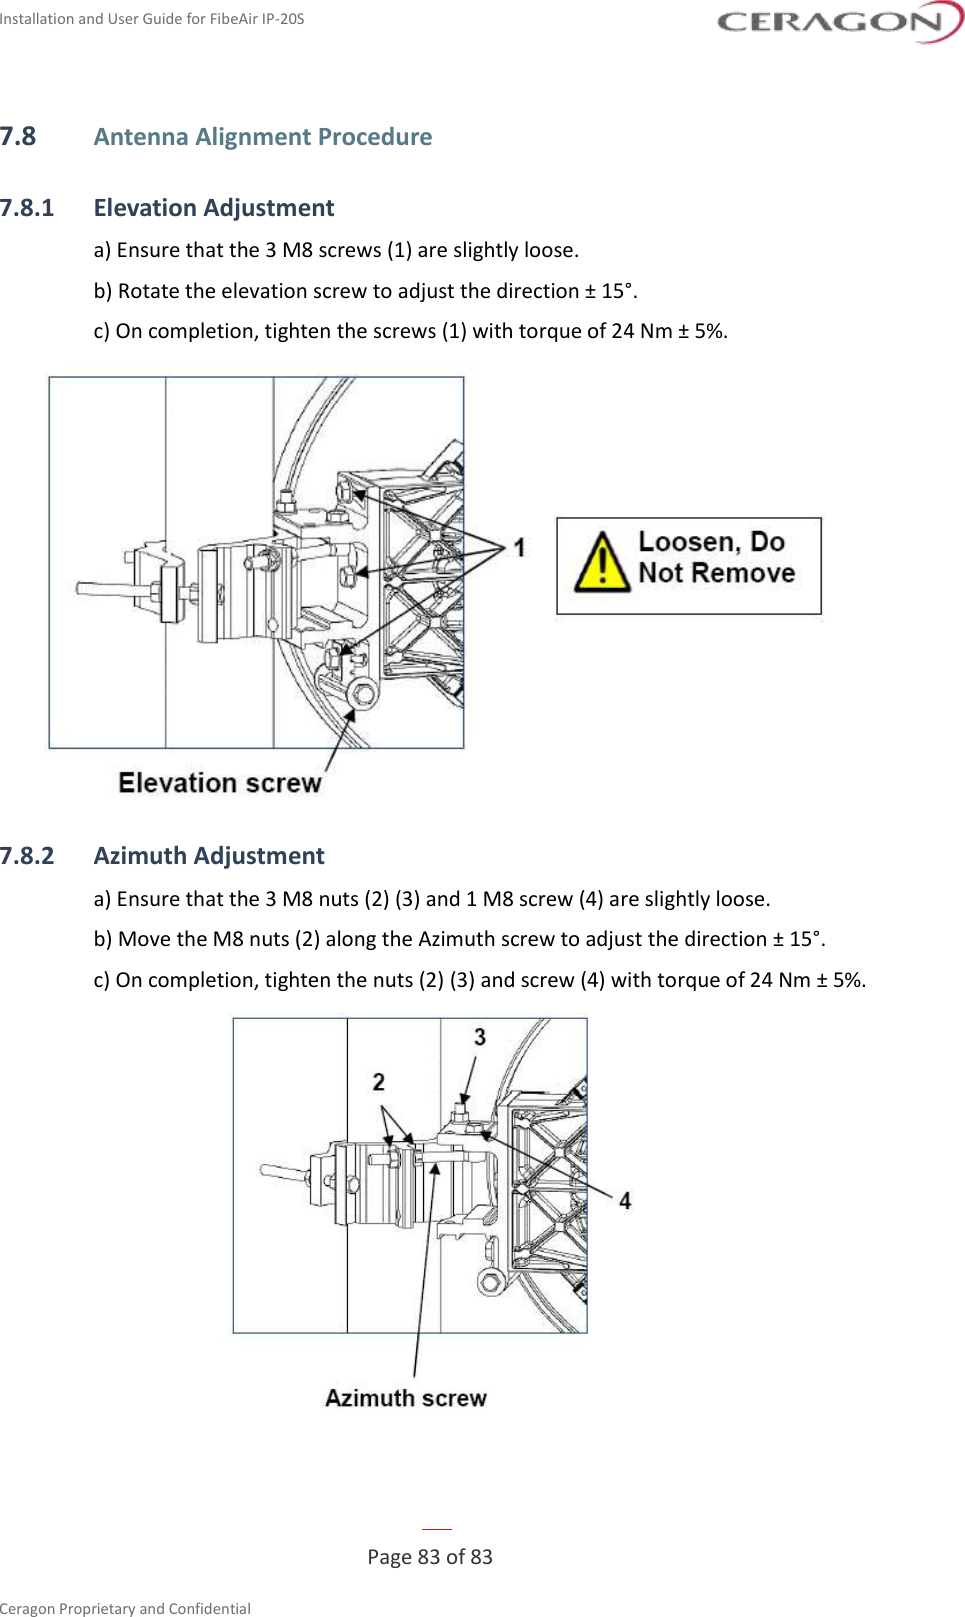 Installation and User Guide for FibeAir IP-20S   Page 83 of 83  Ceragon Proprietary and Confidential     7.8 Antenna Alignment Procedure 7.8.1 Elevation Adjustment a) Ensure that the 3 M8 screws (1) are slightly loose. b) Rotate the elevation screw to adjust the direction ± 15°. c) On completion, tighten the screws (1) with torque of 24 Nm ± 5%.  7.8.2 Azimuth Adjustment a) Ensure that the 3 M8 nuts (2) (3) and 1 M8 screw (4) are slightly loose. b) Move the M8 nuts (2) along the Azimuth screw to adjust the direction ± 15°. c) On completion, tighten the nuts (2) (3) and screw (4) with torque of 24 Nm ± 5%.   